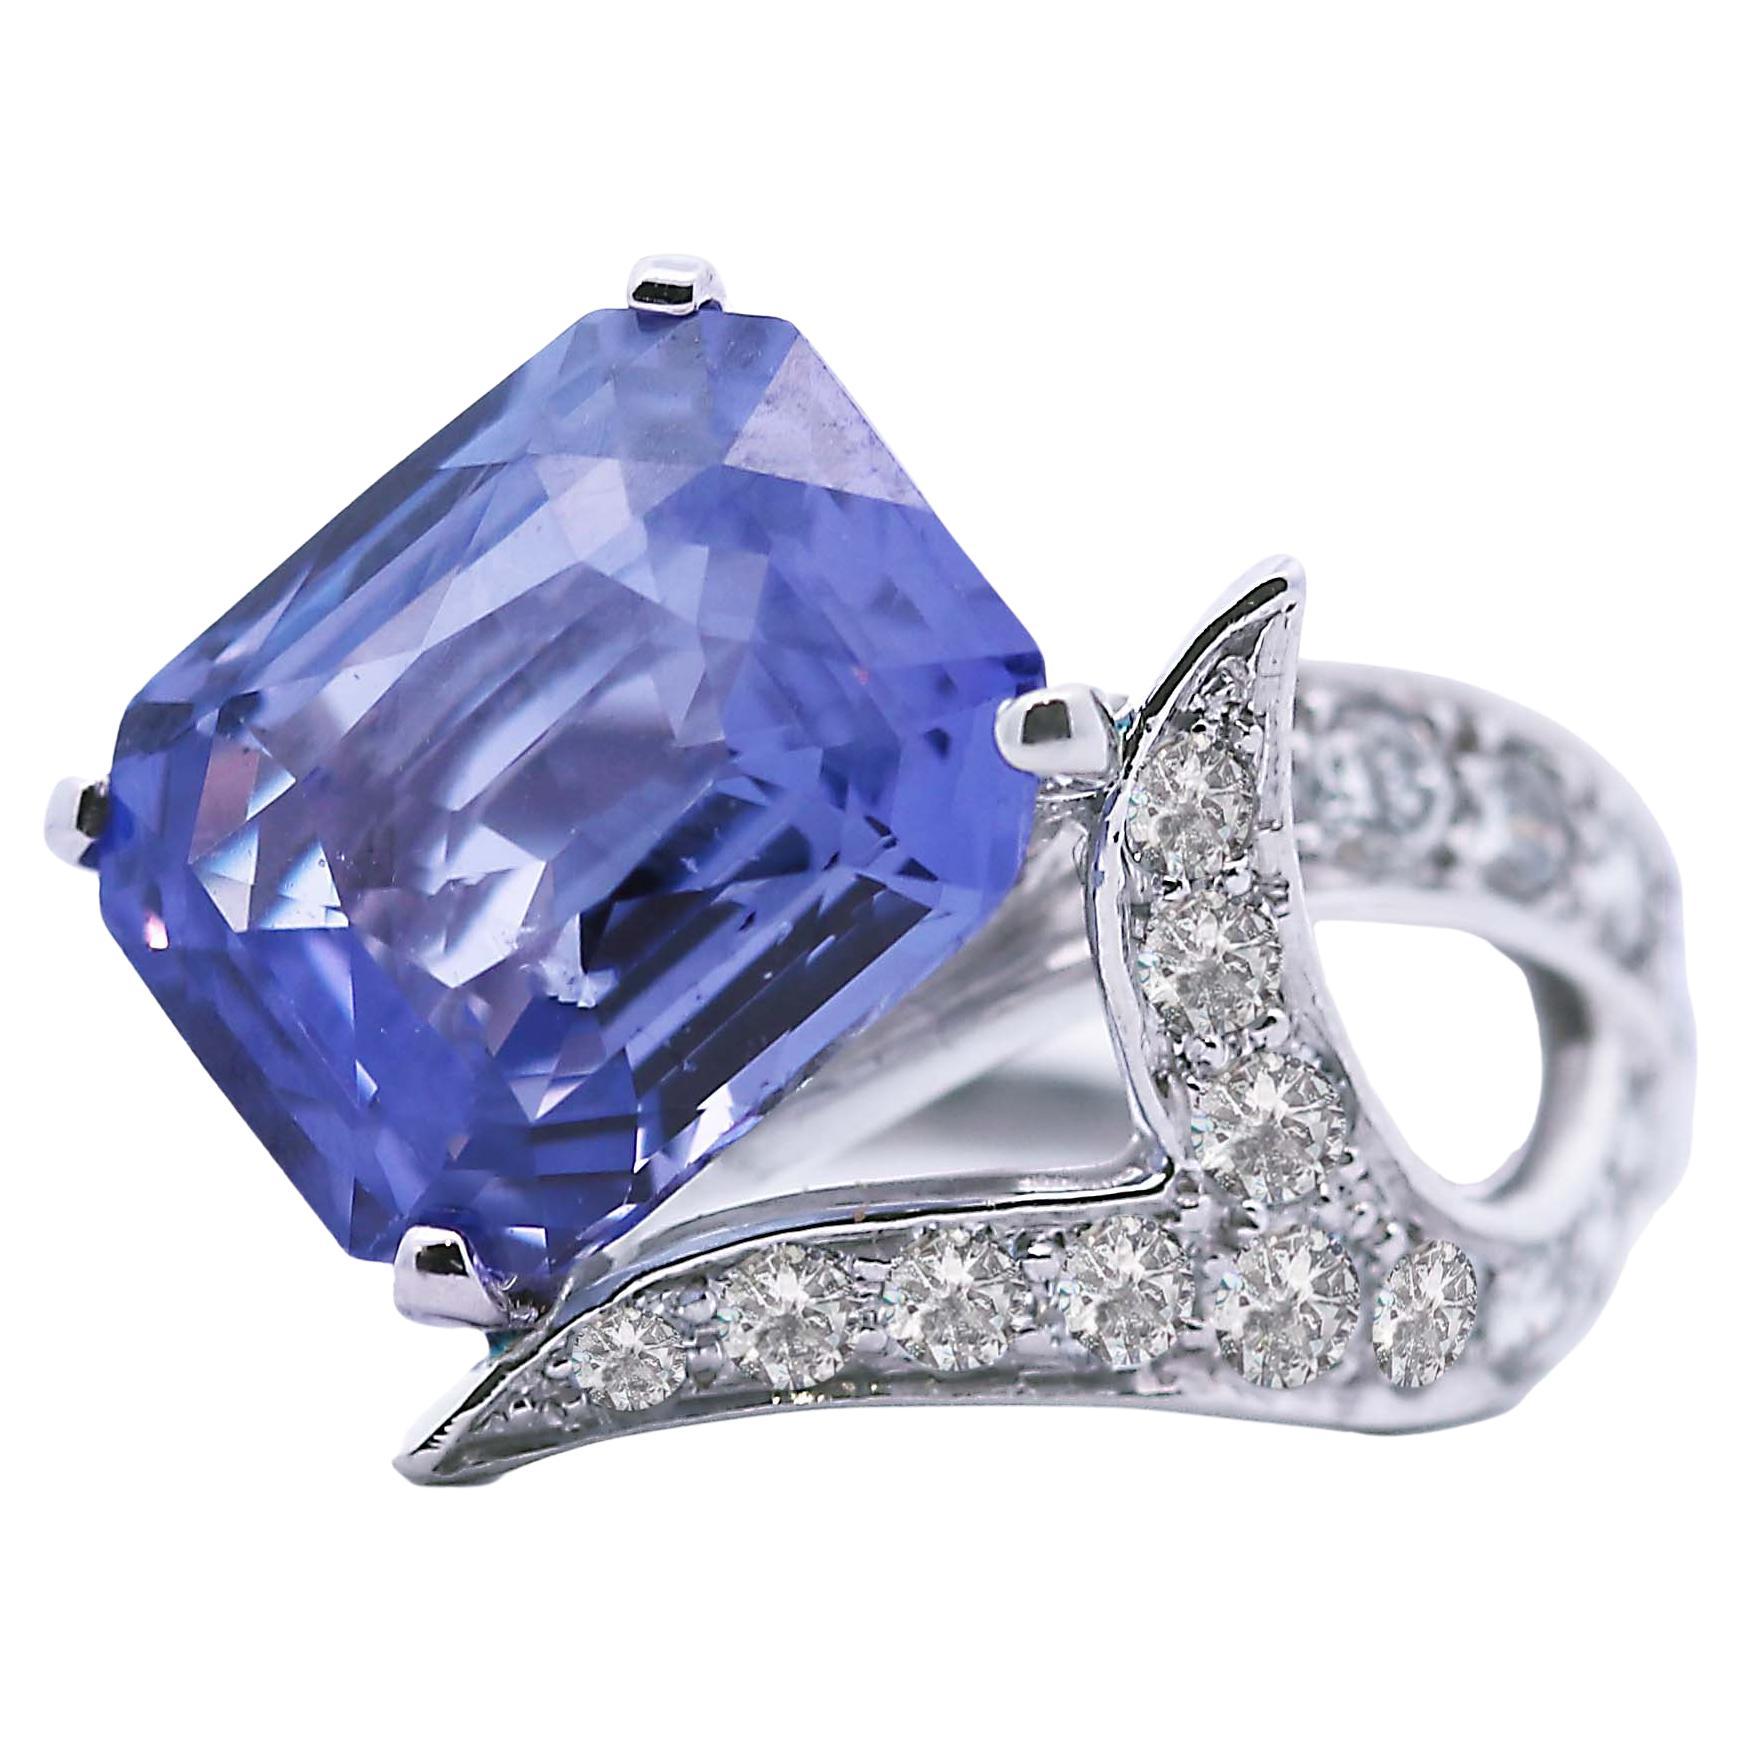 What is a synthetic color-change sapphire?